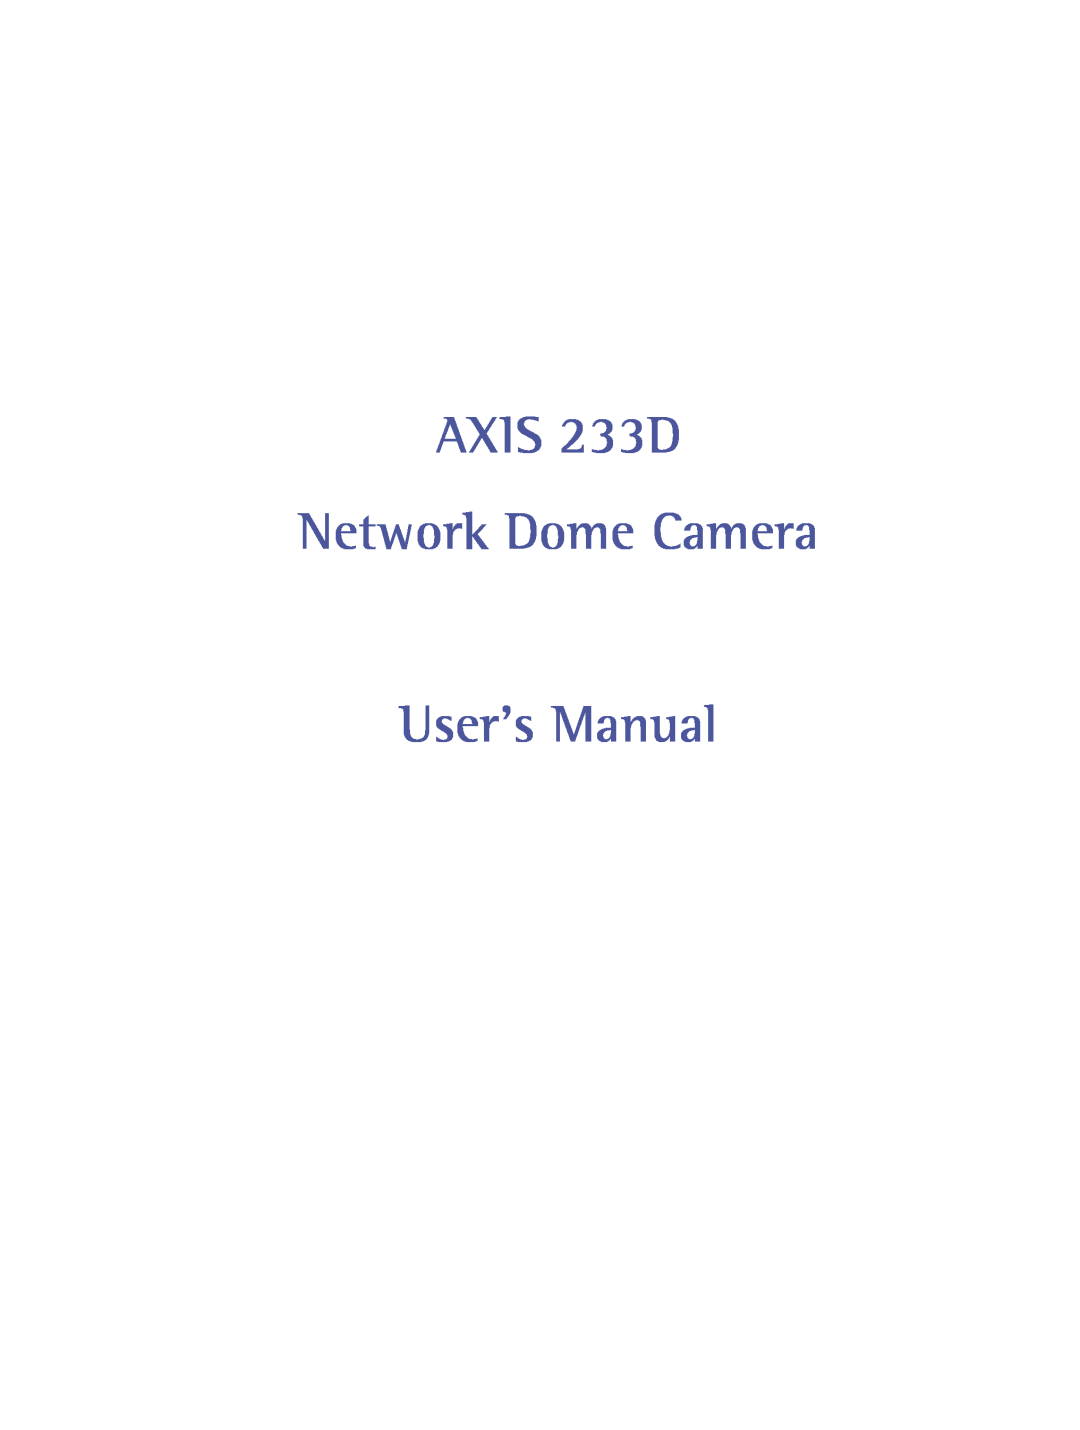 Axis Communications user manual AXIS 233D Network Dome Camera User’s Manual 